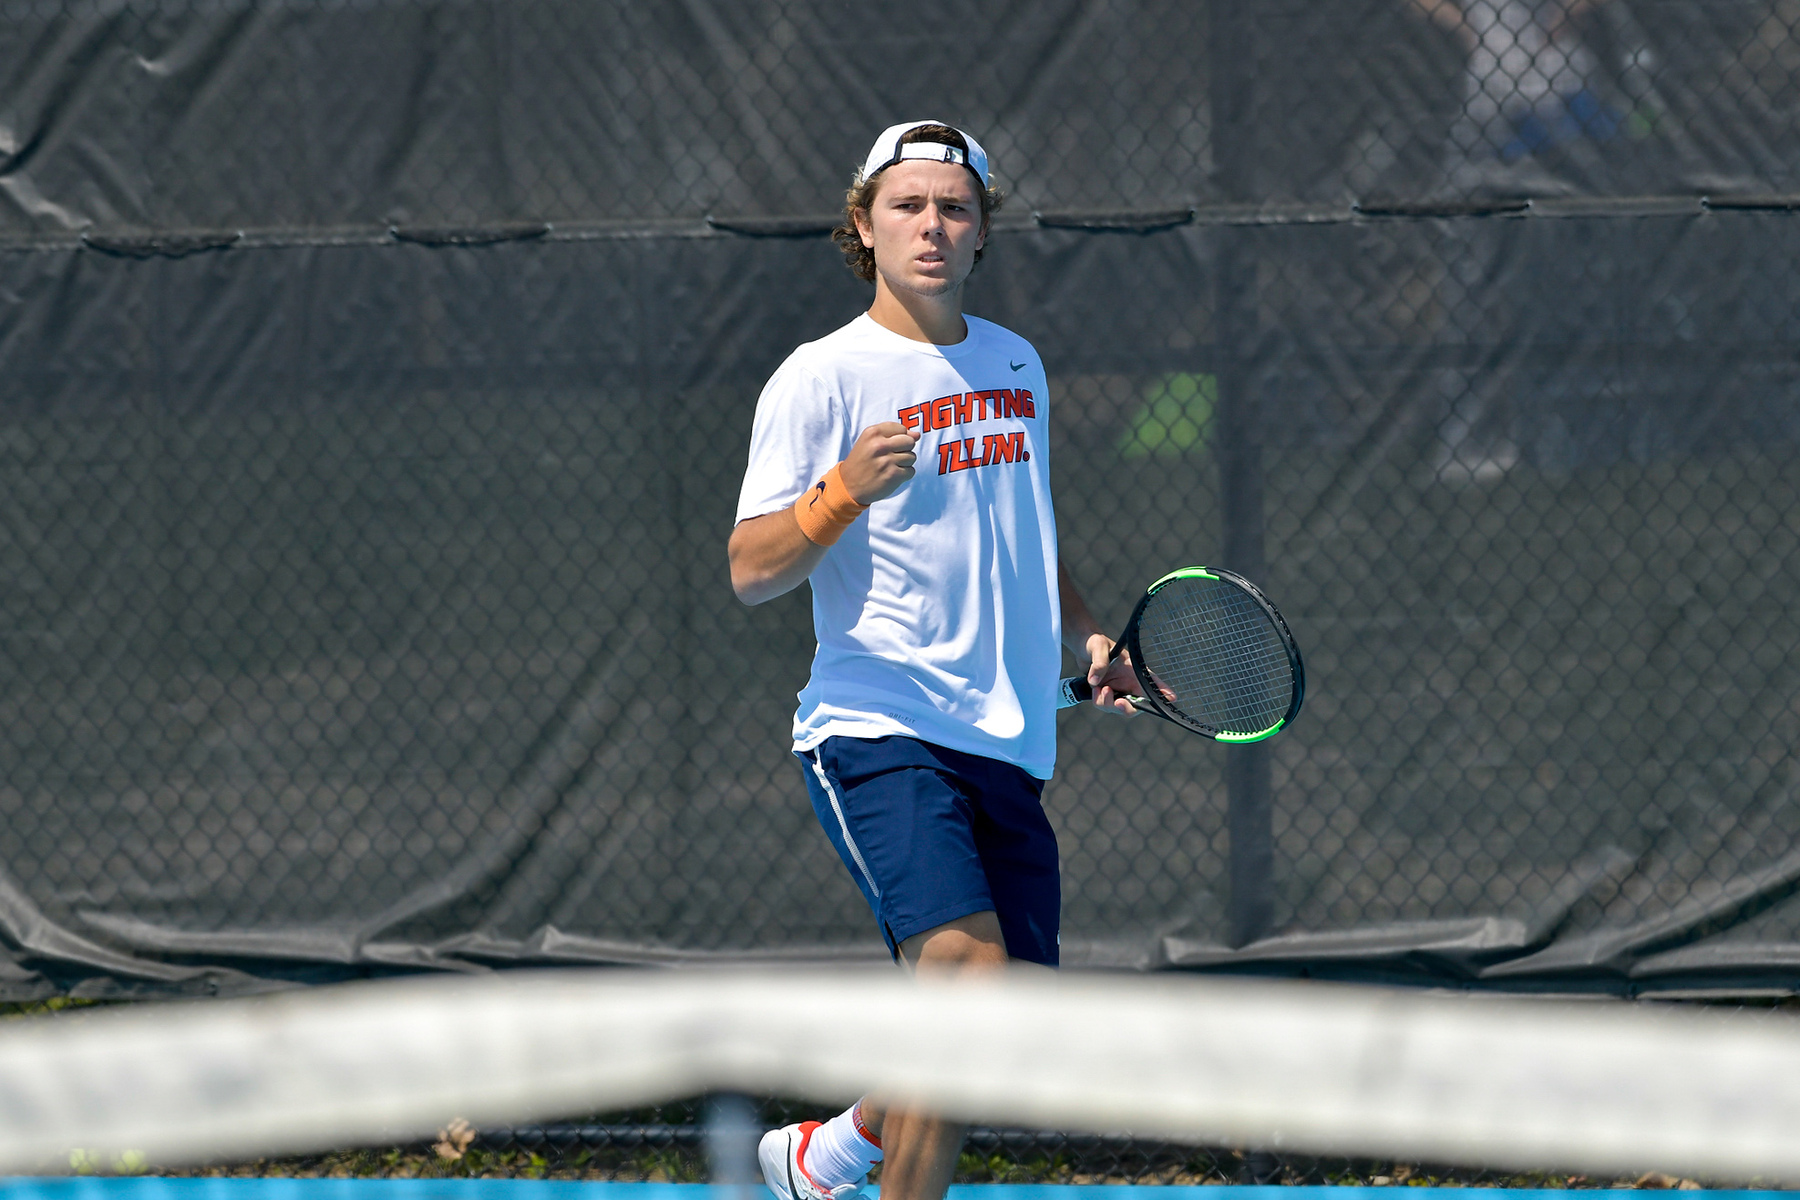 Aleks Kovacevic pumps a fist after winning a point in his match Tuesday